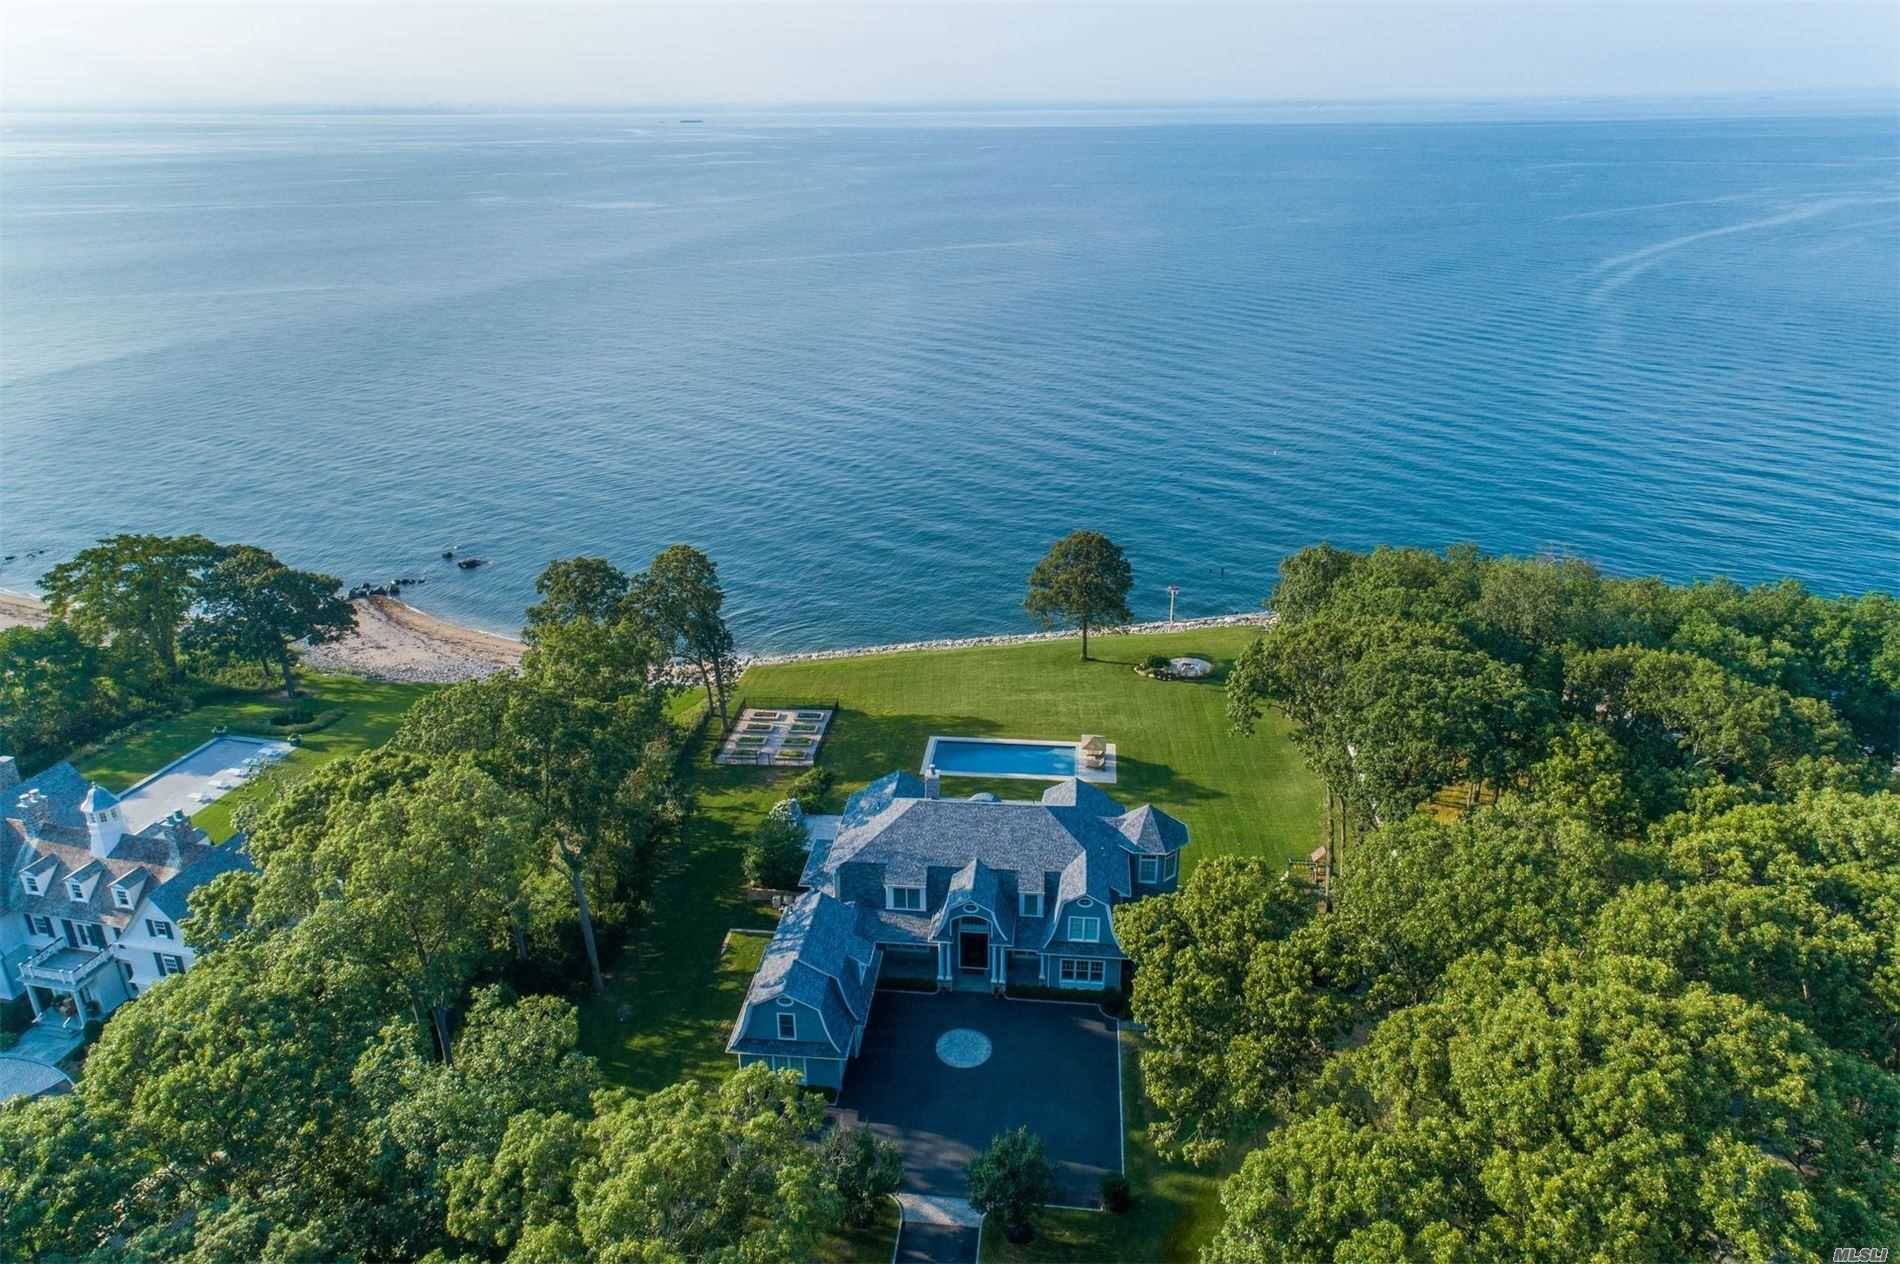 Young, exquisite 6 bedroom country colonial beautifully situated on the Long Island Sound.